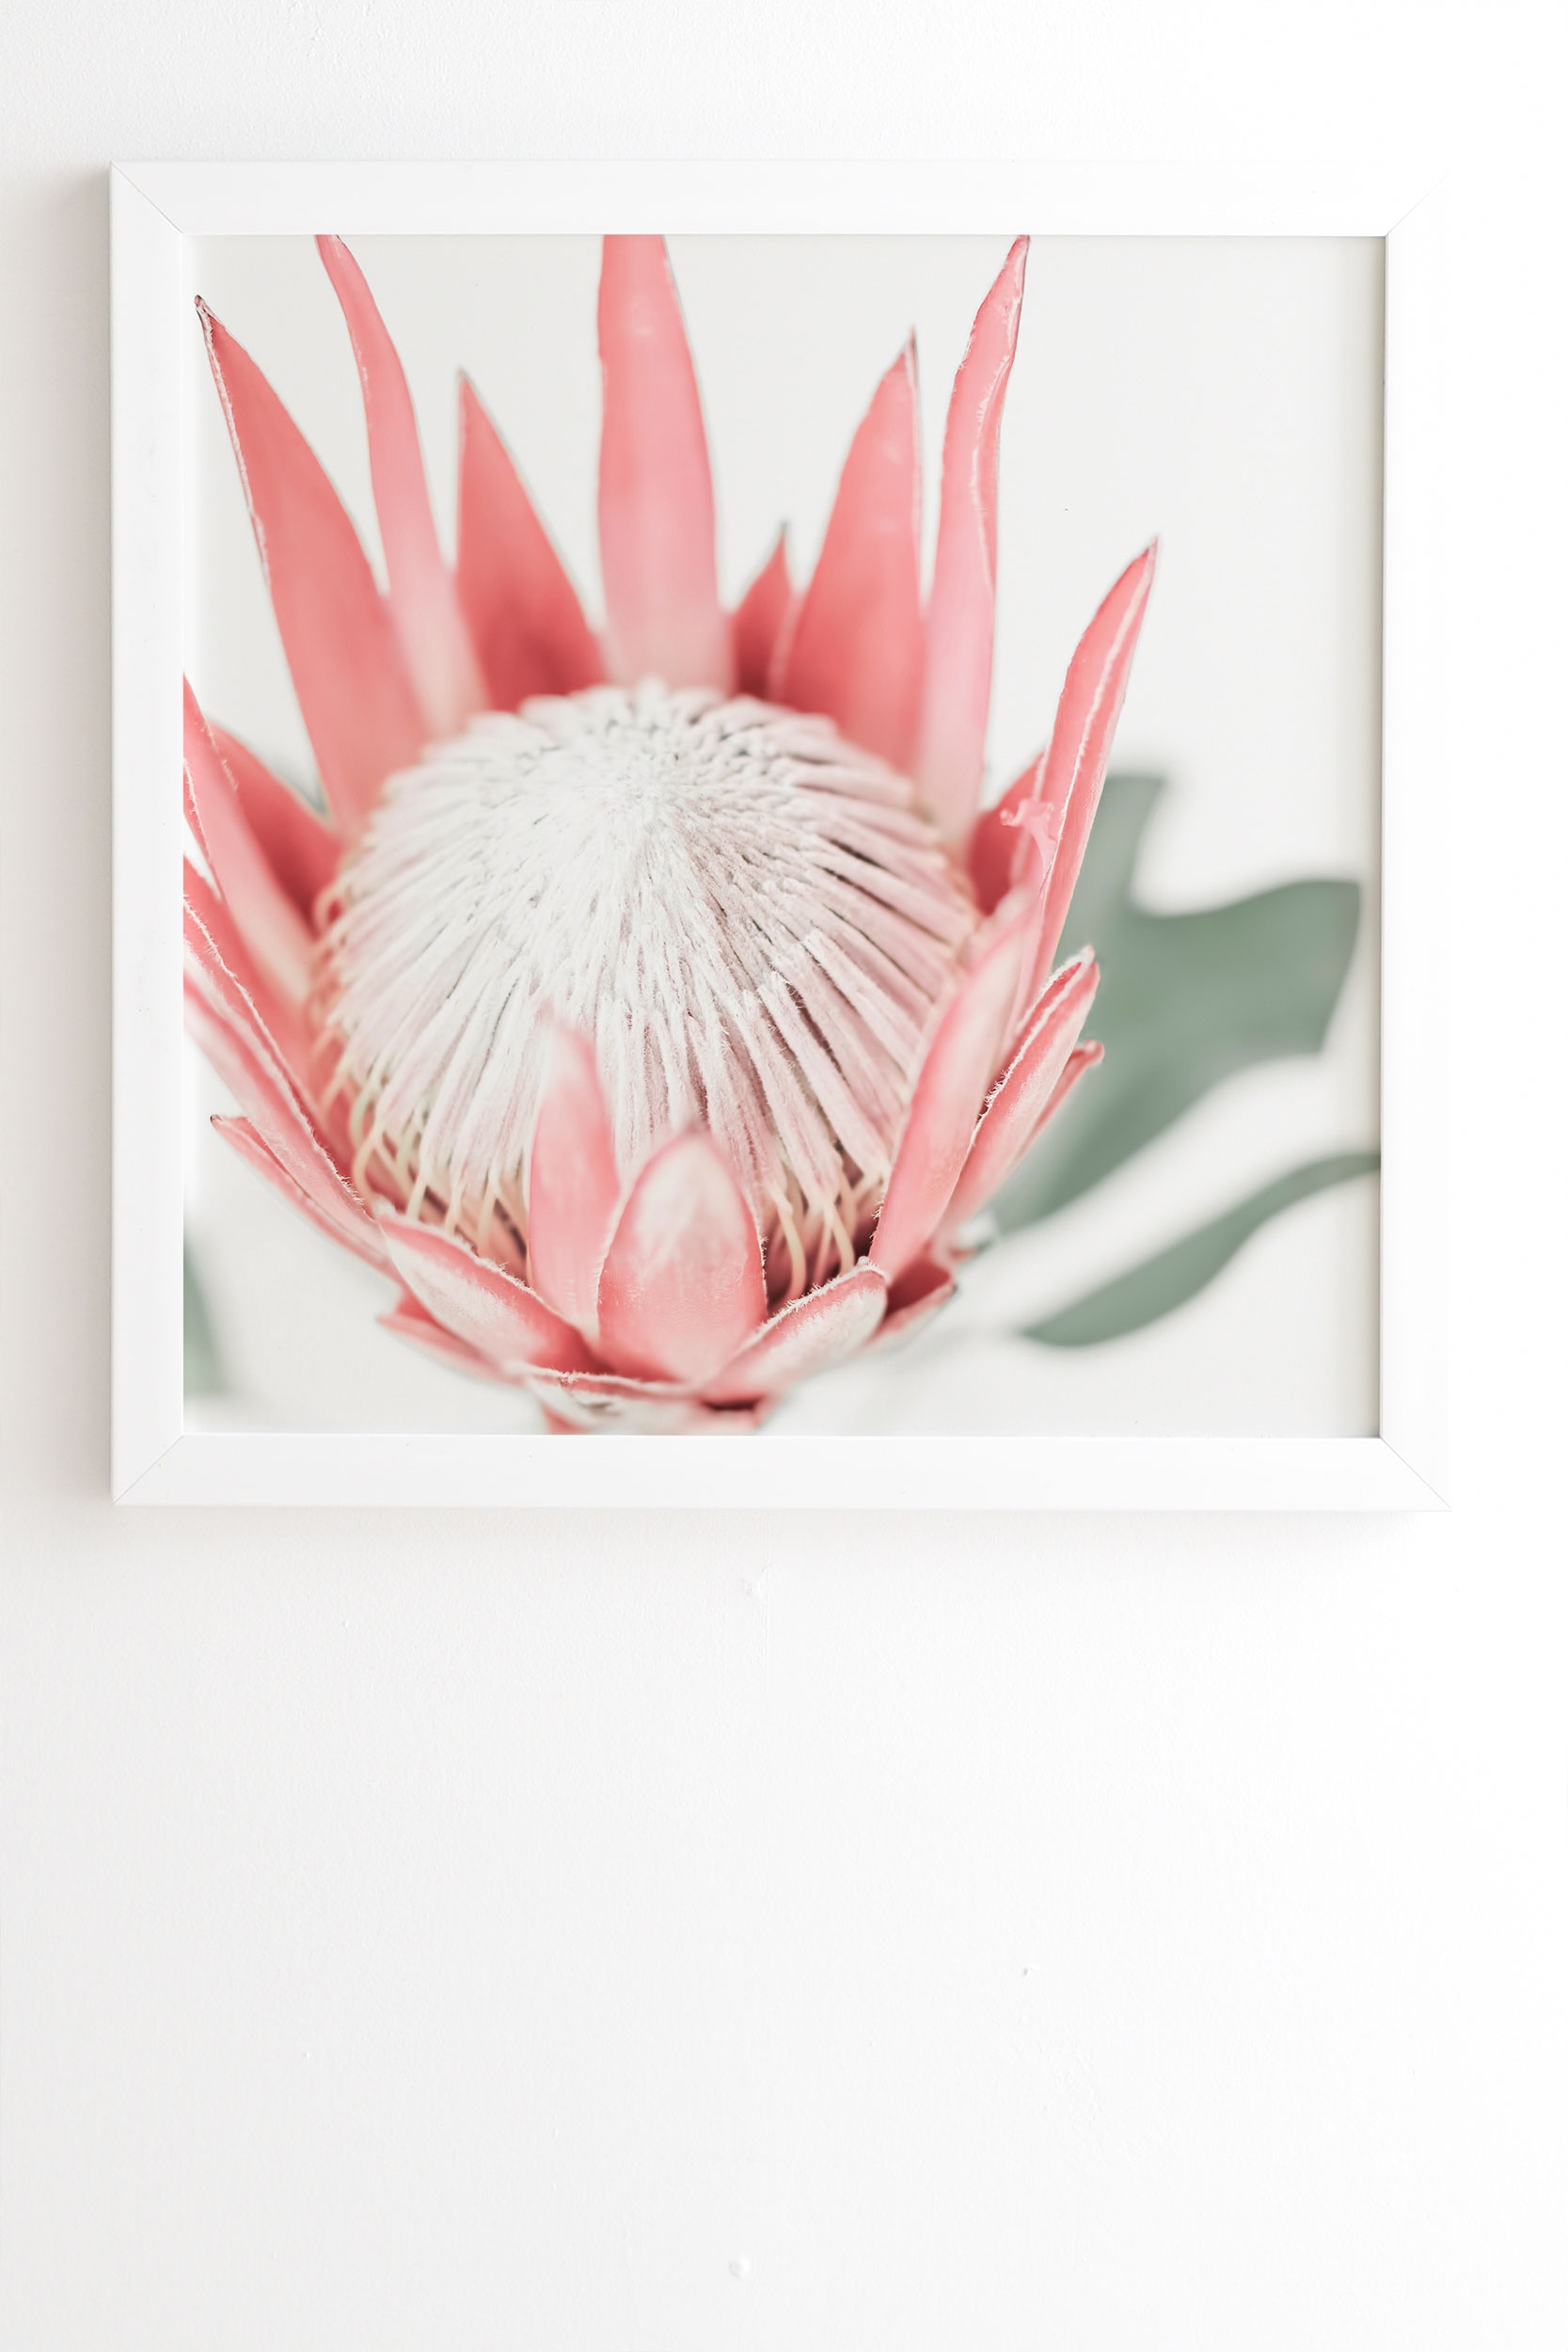 King Protea Flower Iii by Ingrid Beddoes - Framed Wall Art Basic White 8" x 9.5" - Image 1